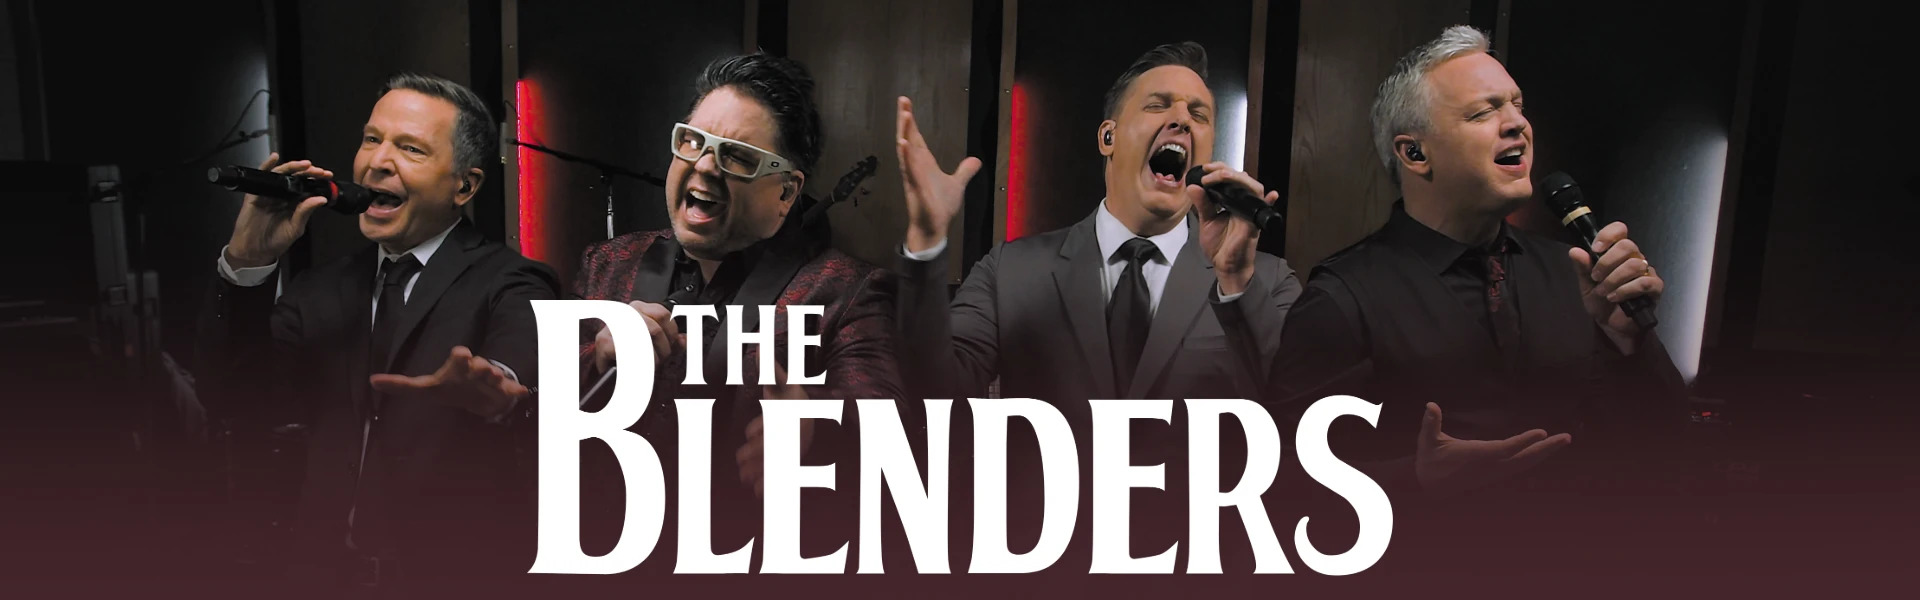 Promotional image for 'The Blenders,' featuring the four members of the vocal group singing passionately into microphones, with the group name in bold text at the bottom.